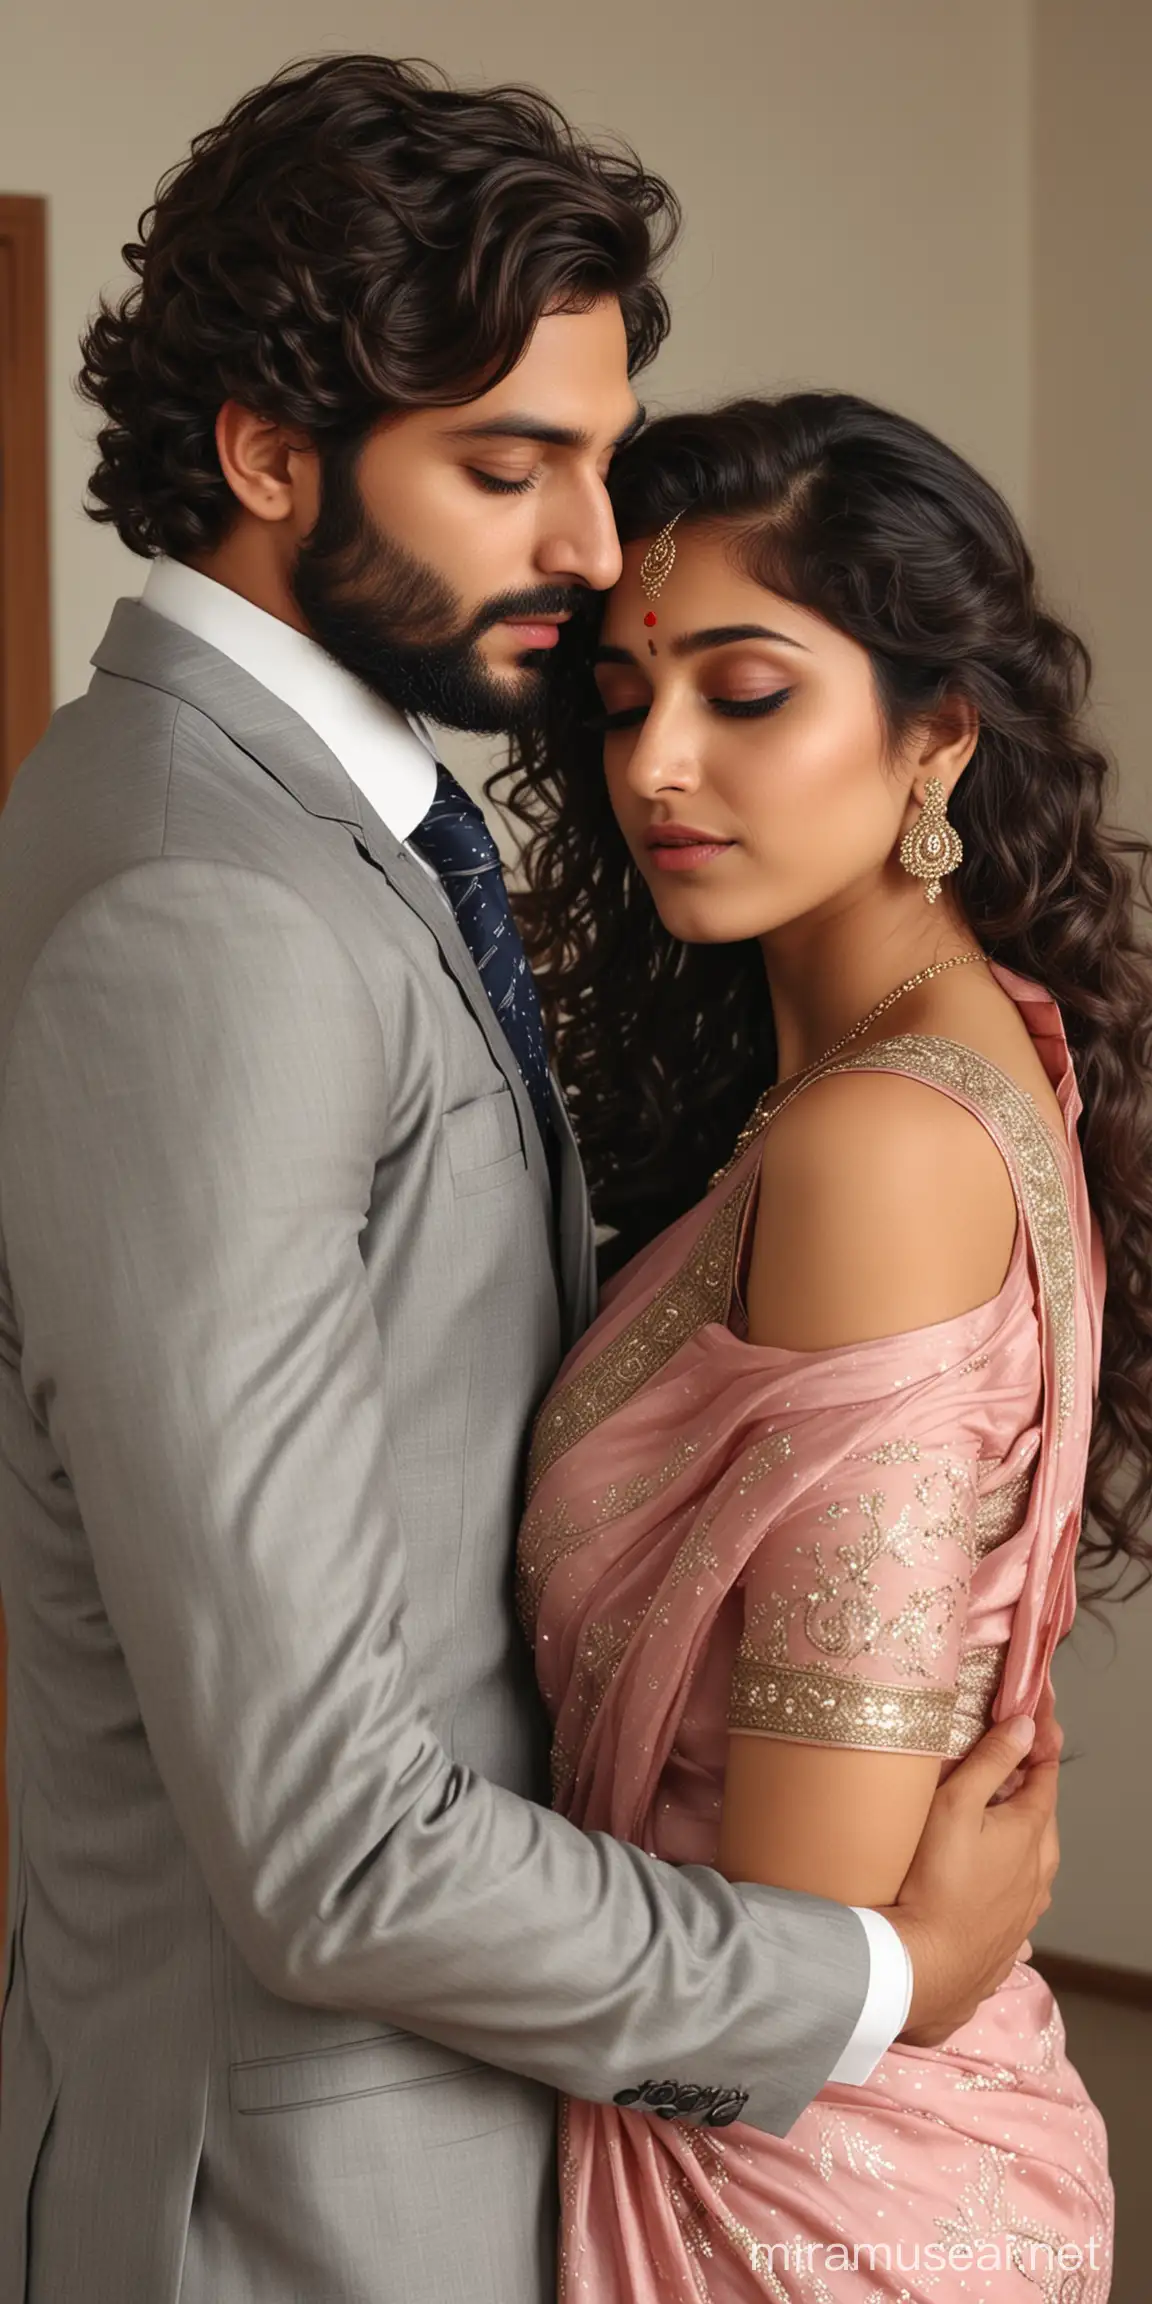 couple, most handsome full body photo of  elegant european male,  formals with tie,  elegant looks,  beard,  most beautiful cute indian girl, elegant saree, low cut back, makeup, curly long hair,  girl head resting on man chest  with emotional  reunited feeling, emotion and crying, weeping with tears,  low cut back, man comforting girl, 
photo realistic, 4k.